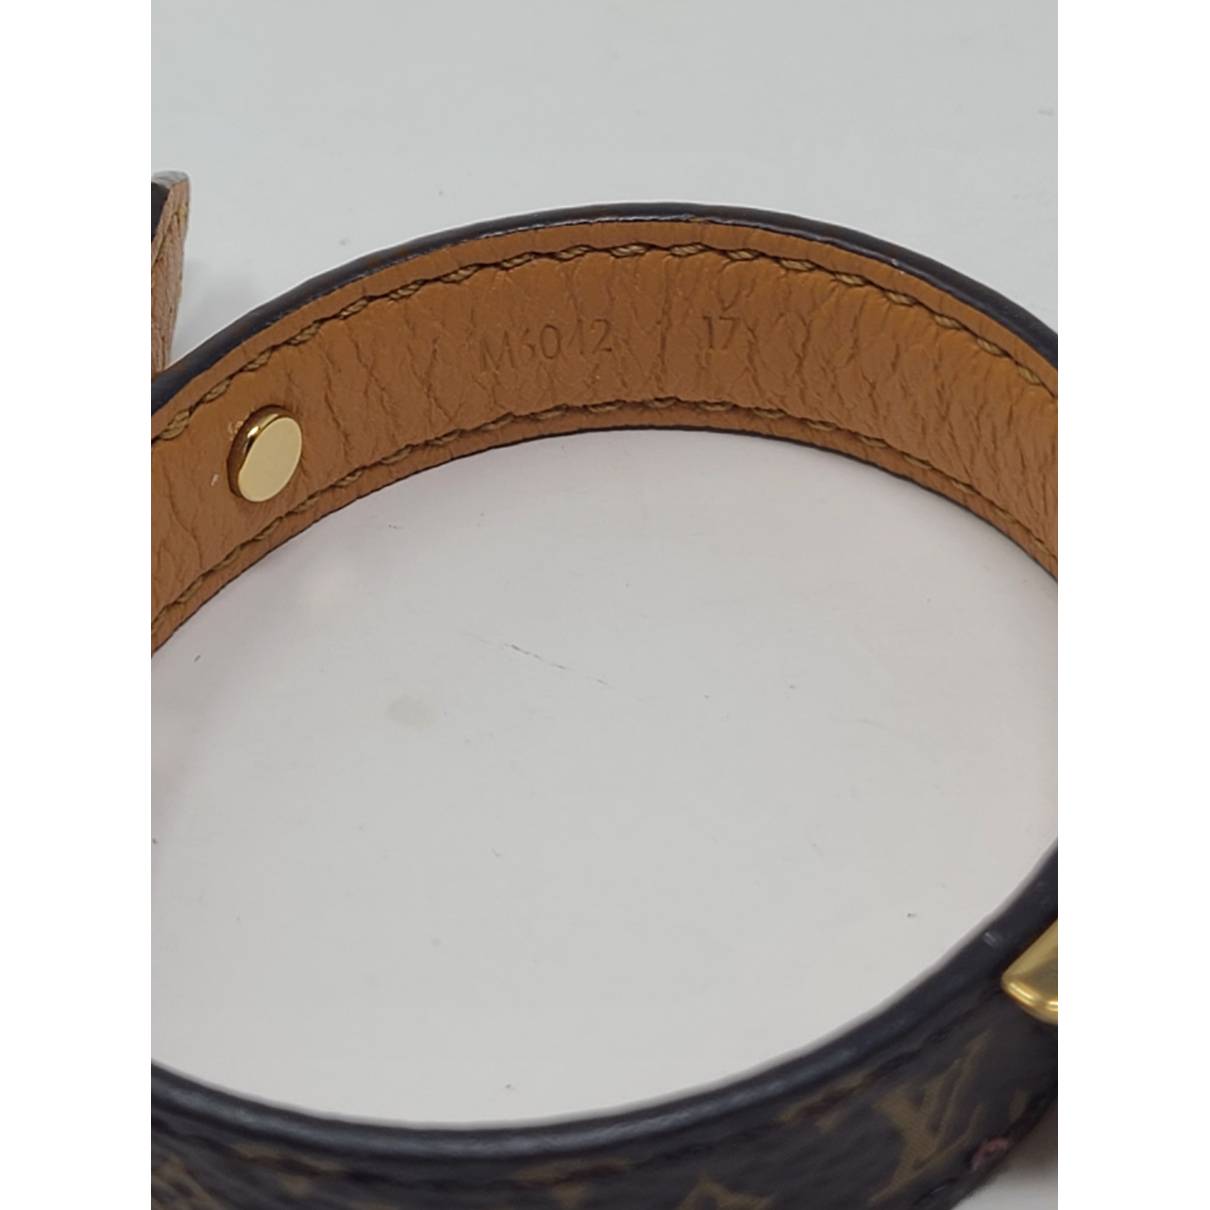 Monogram leather bracelet Louis Vuitton Brown in Leather - 30927792